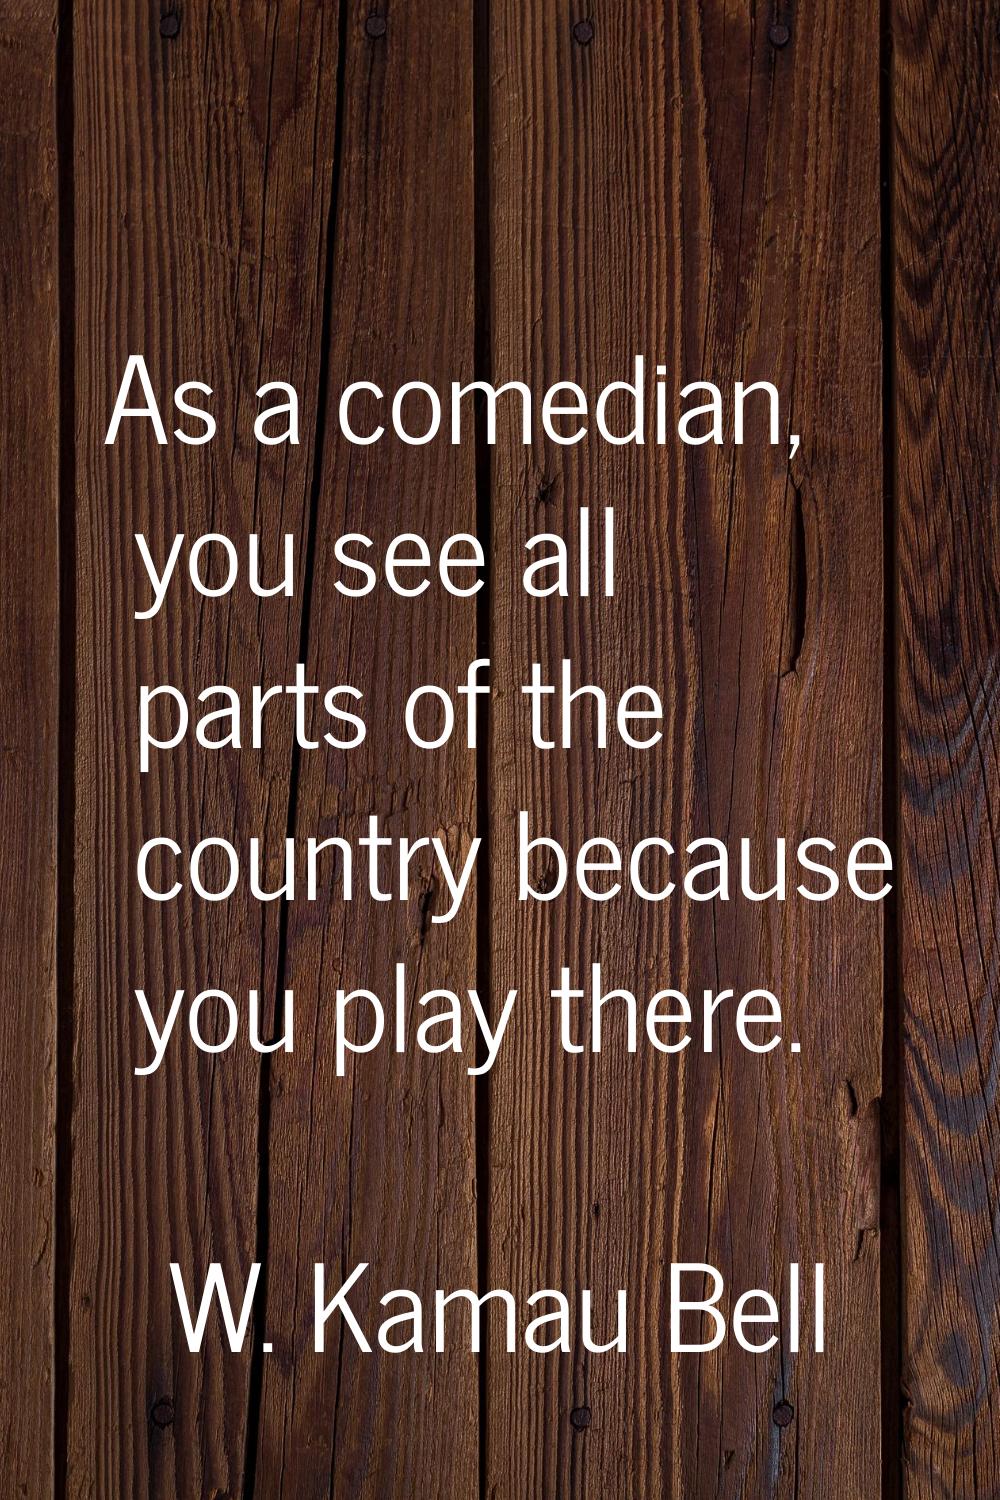 As a comedian, you see all parts of the country because you play there.